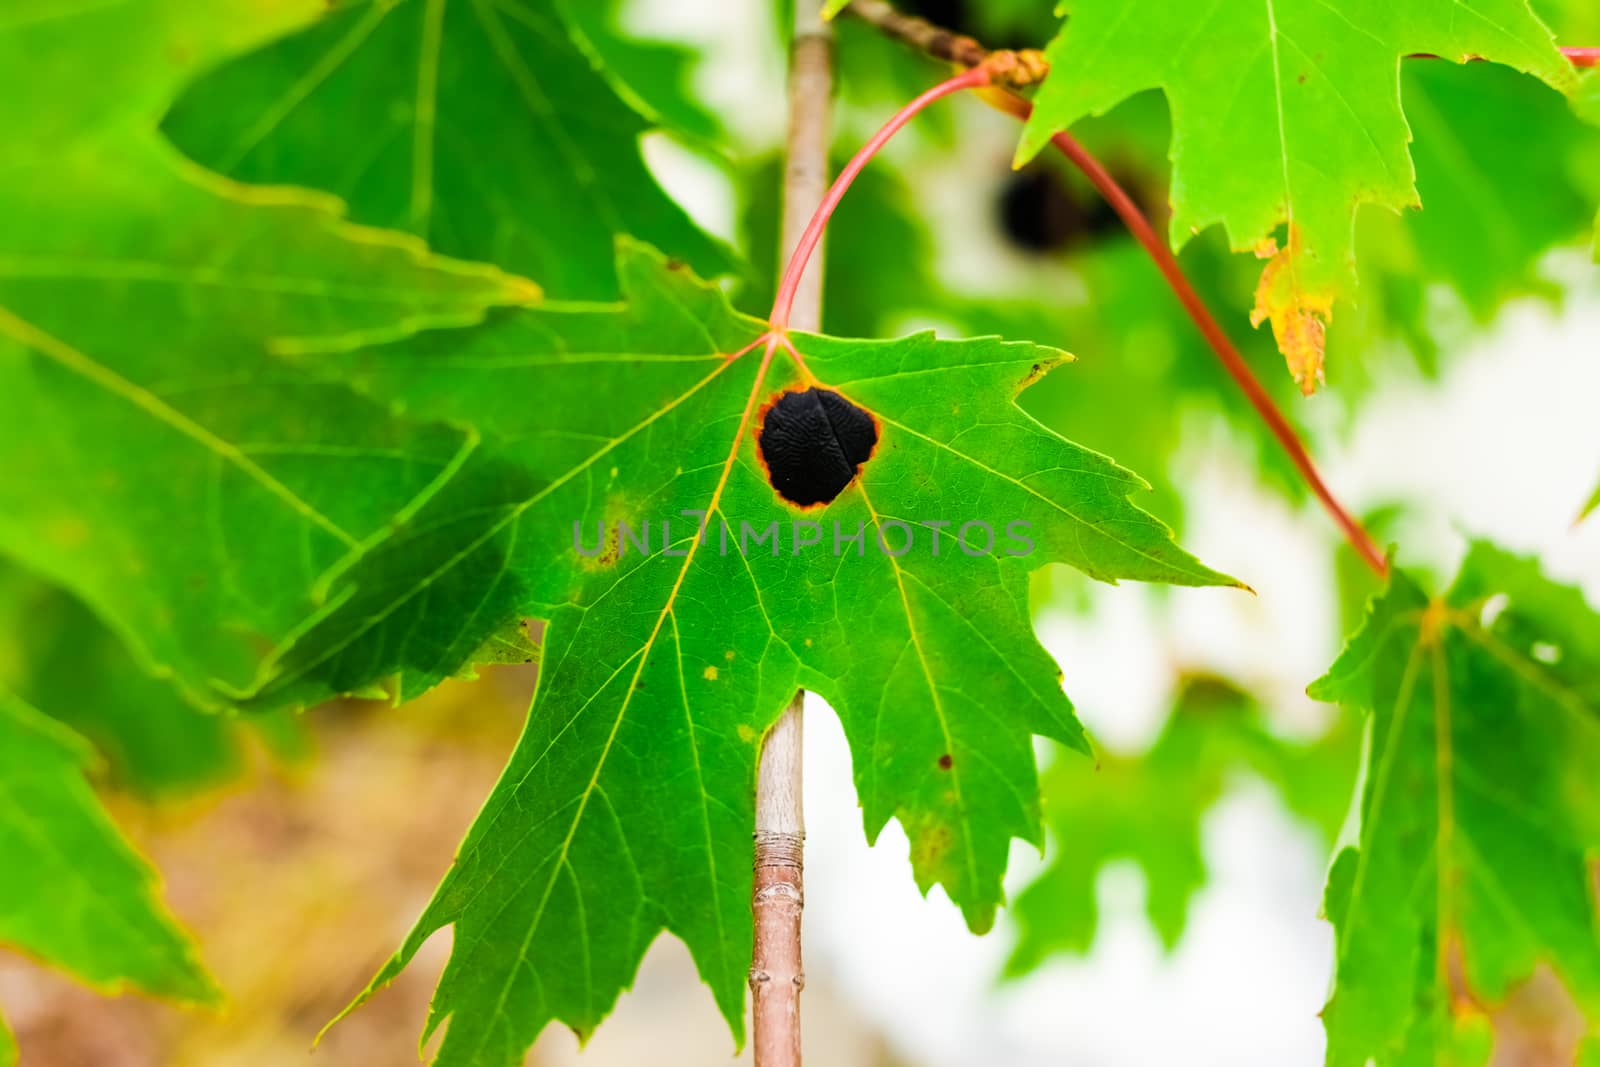 Black Tarry Spot on a Maple Leaf Called the "Goudronneuse" is a Microscopic Fungus Infection Affecting the Norway Maple in Canada